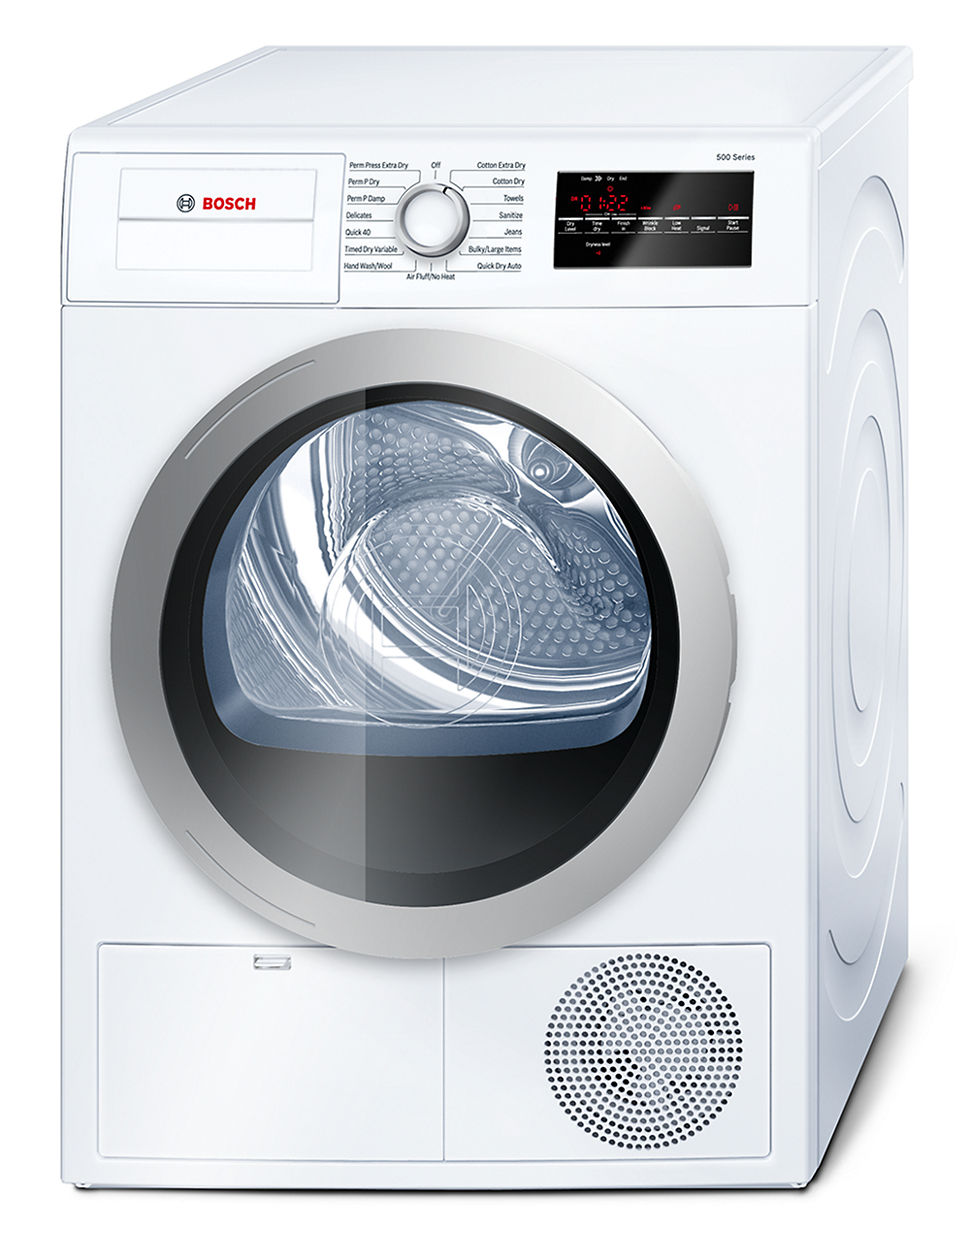 Which store sells dryers for the best price?